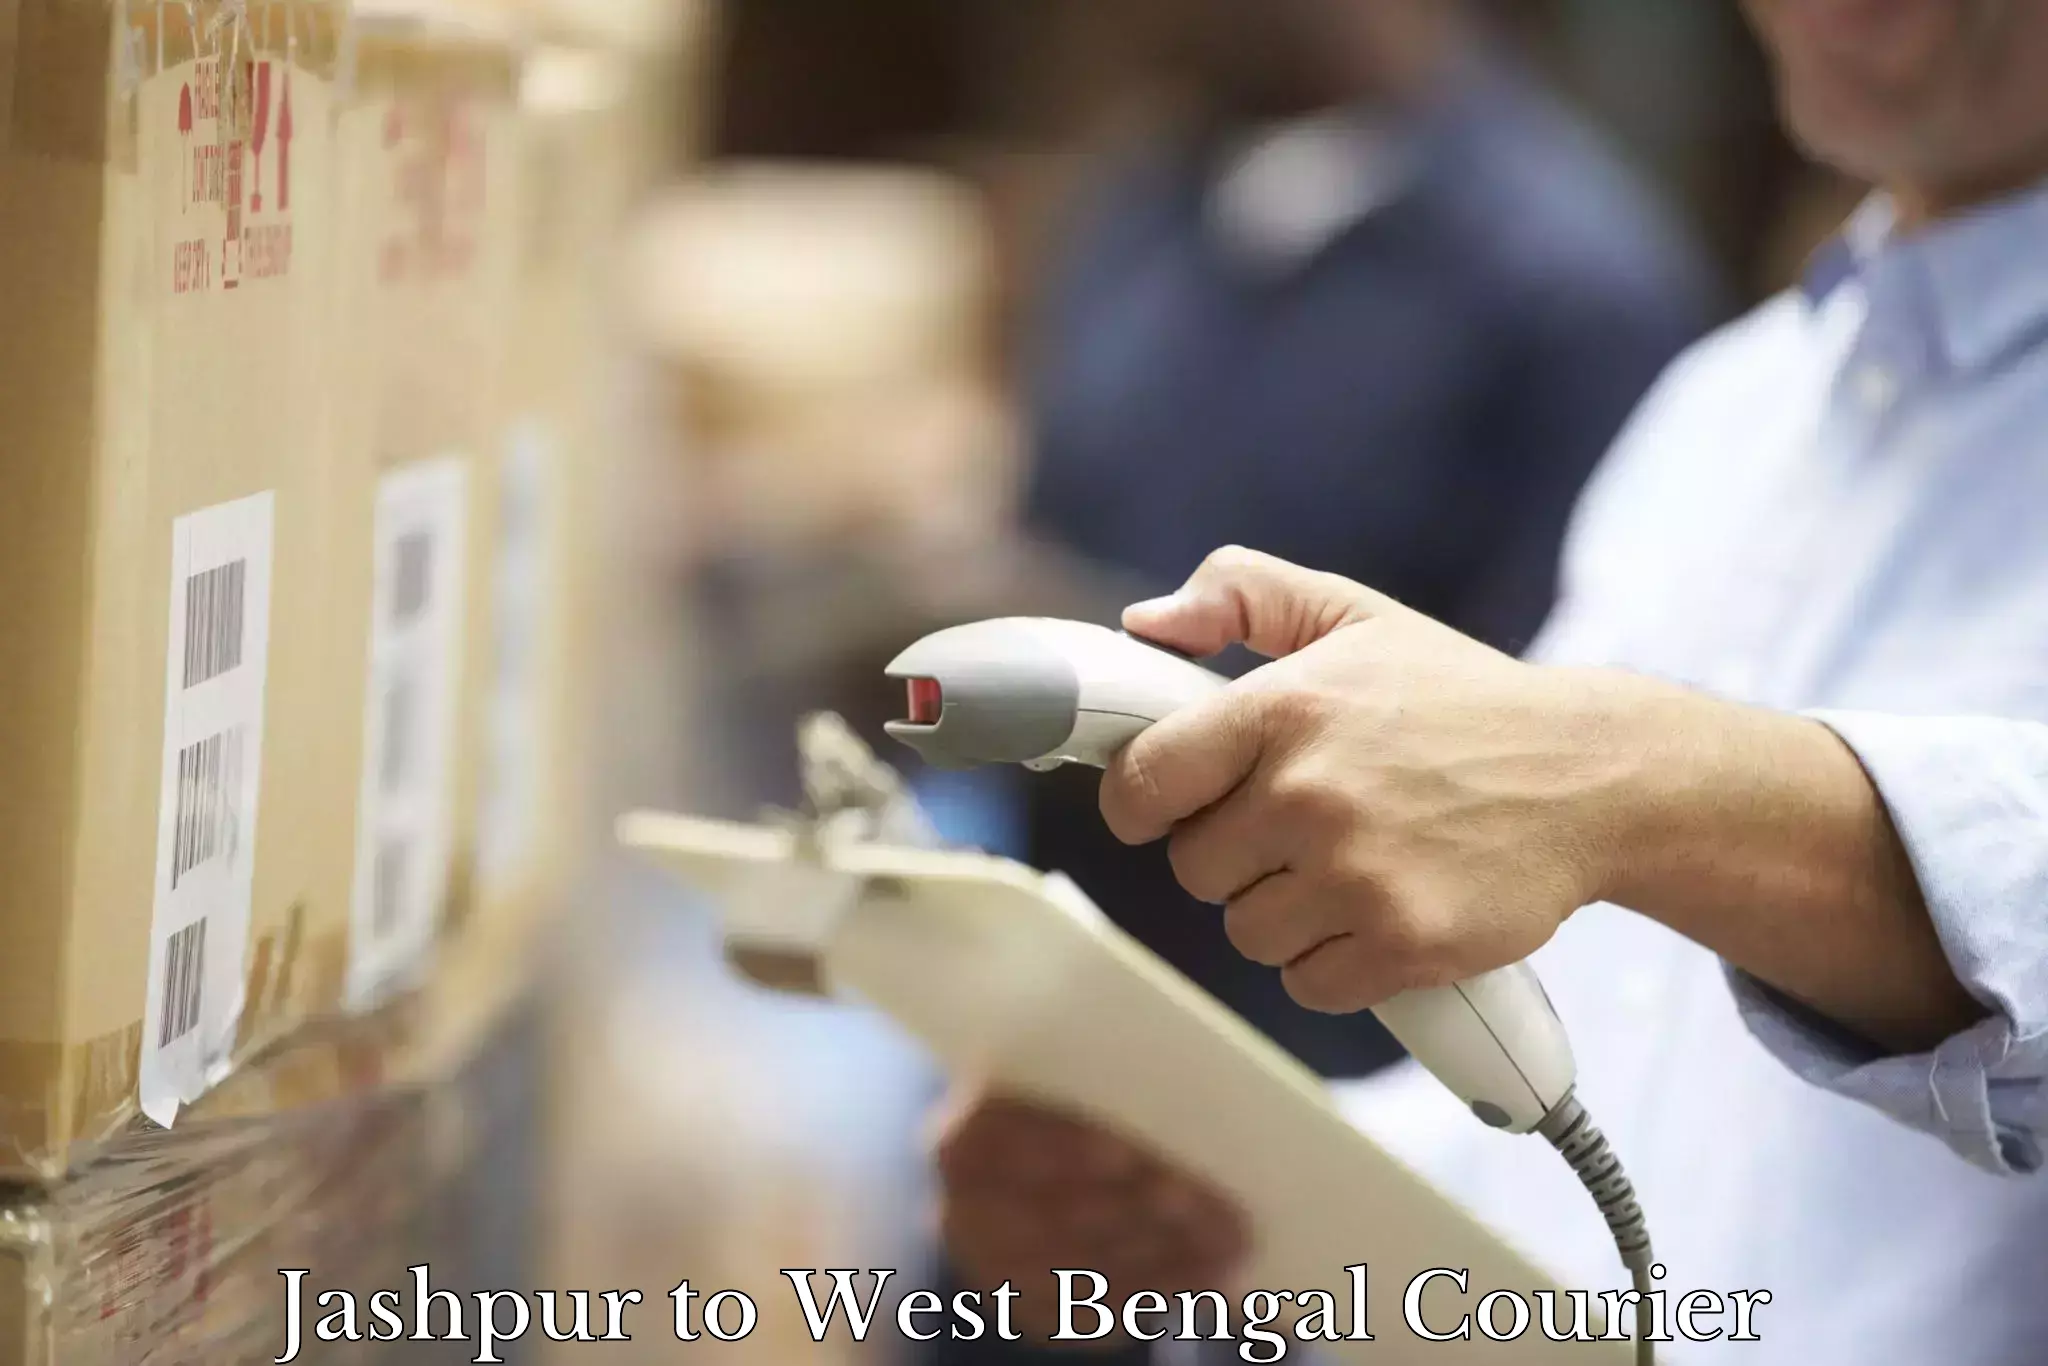 Reliable delivery network Jashpur to West Bengal